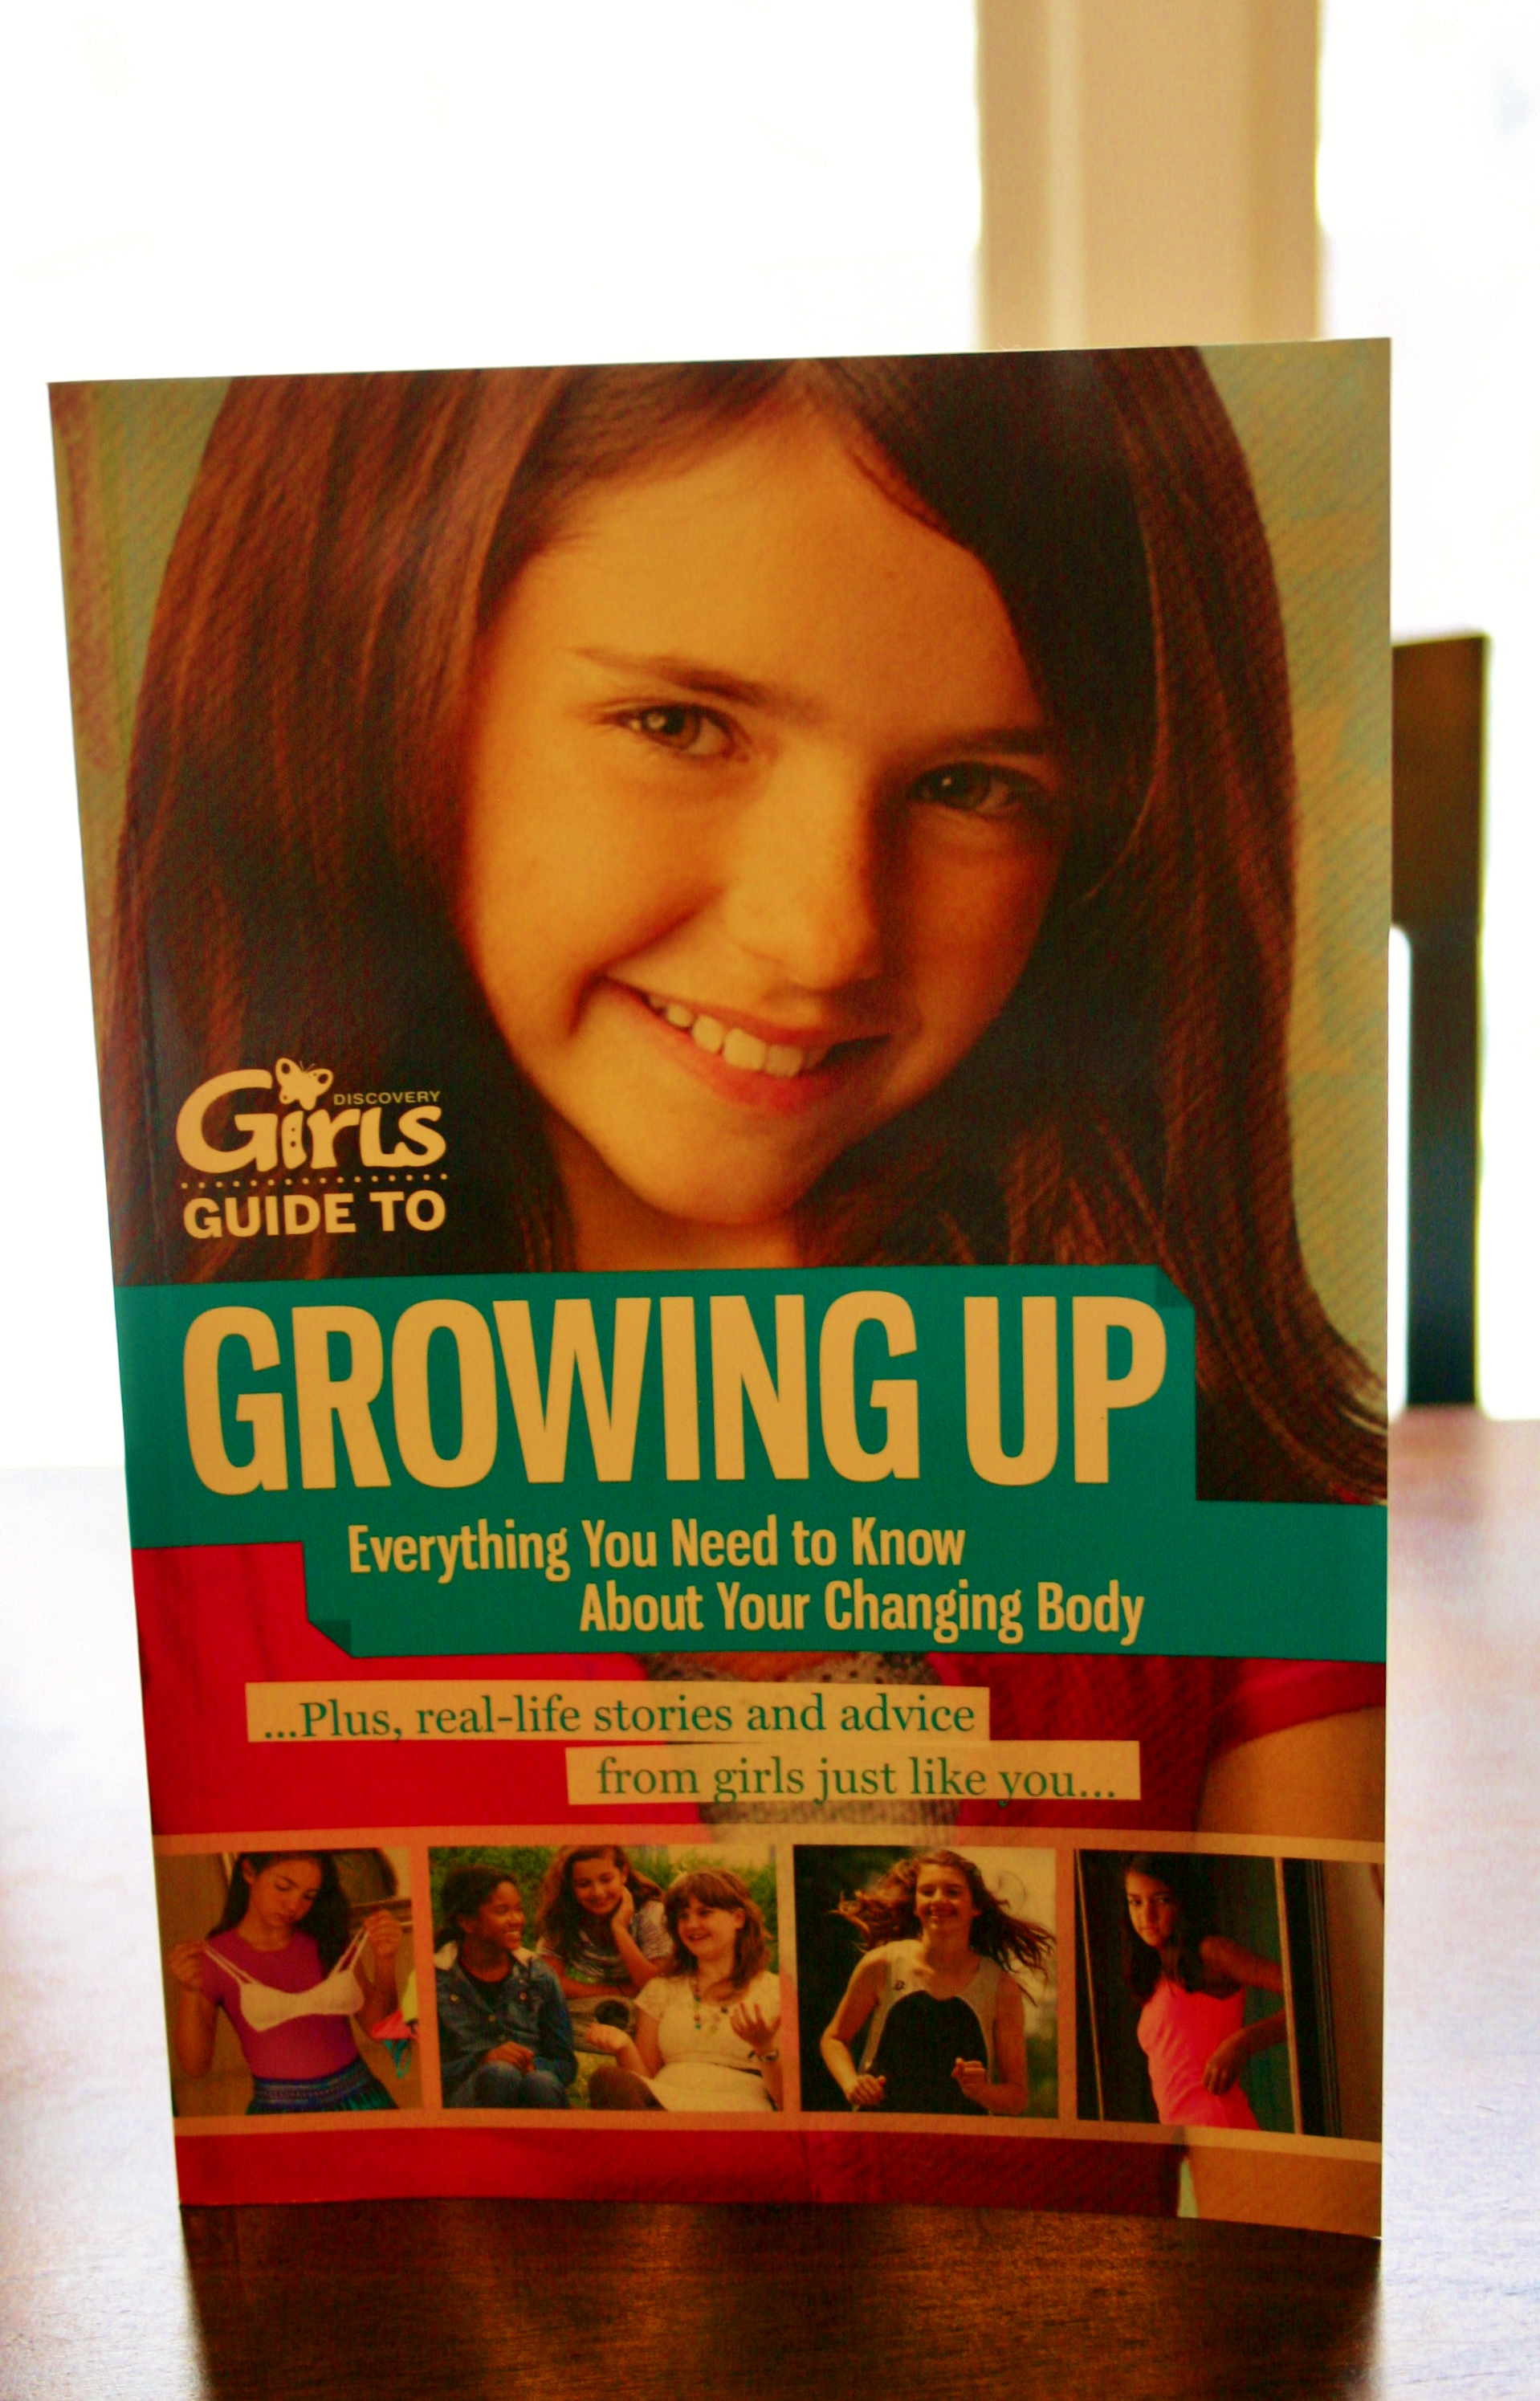 Book Reviews for The Girls' Guide to Growing Up Great: Changing